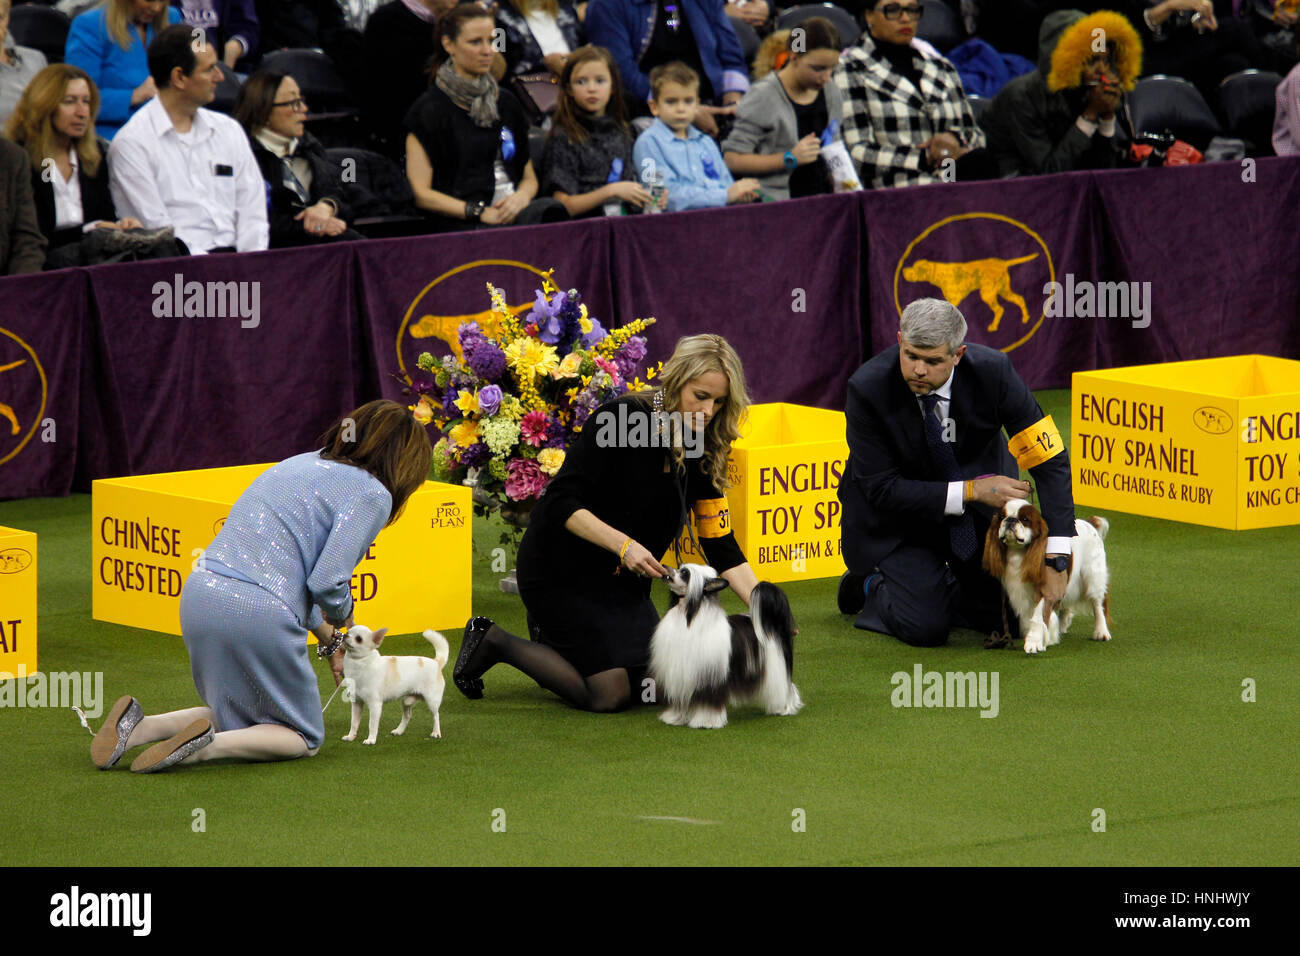 New York City, 13th February 2017. Owners tend to their dogs during competition in the Toy Division at the 141st Annual Westminster Dog Show at Madison Square Garden in New York City on February 13th, 2017.   Shown here from left to right are a Chihuahua Smooth Coat, a Chinese Crested, and an English Toy Spaniel Credit: Adam Stoltman/Alamy Live News Stock Photo